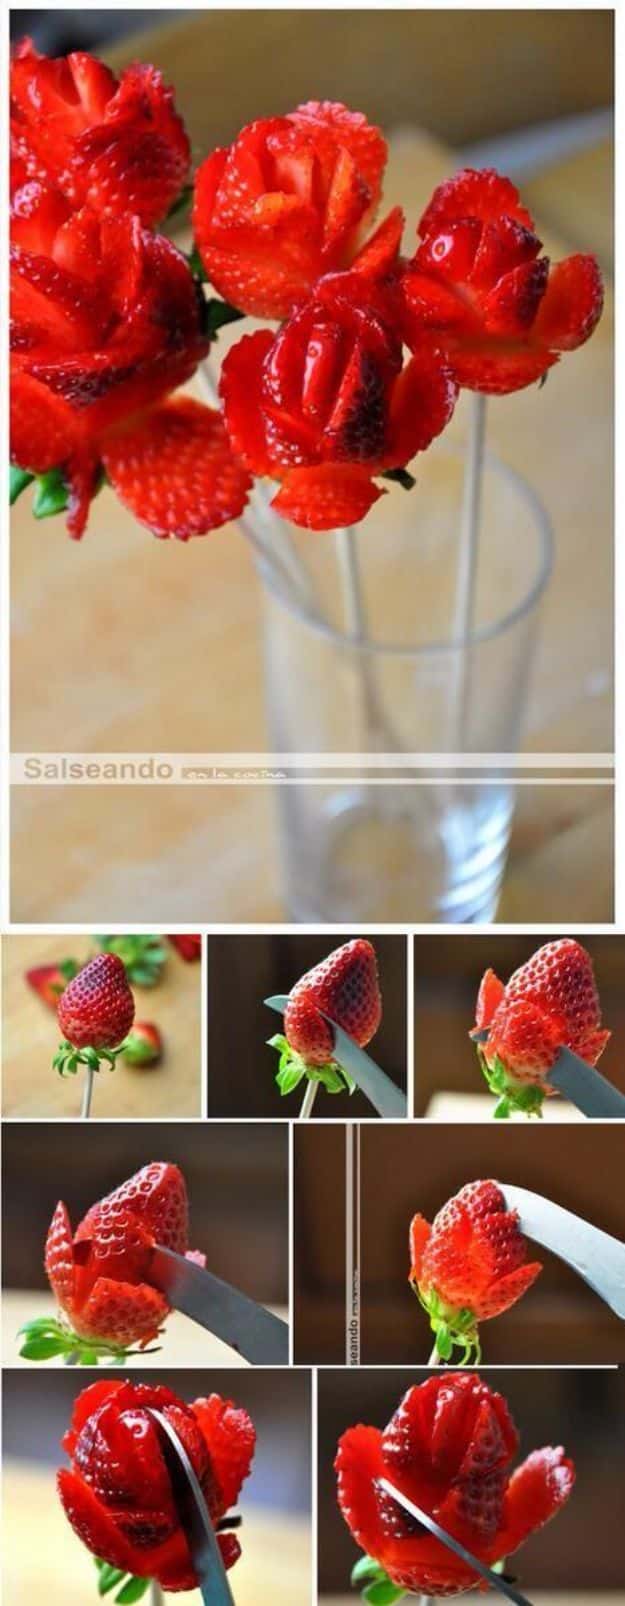 Rose Crafts - Strawberry Roses - Easy Craft Projects With Roses - Paper Flowers, Quilt Patterns, DIY Rose Art for Kids - Dried and Real Roses for Wall Art and Do It Yourself Home Decor - Mothers Day Gift Ideas - Fake Rose Arrangements That Look Amazing - Cute Centerrpieces and Crafty DIY Gifts With A Rose http://diyjoy.com/rose-crafts